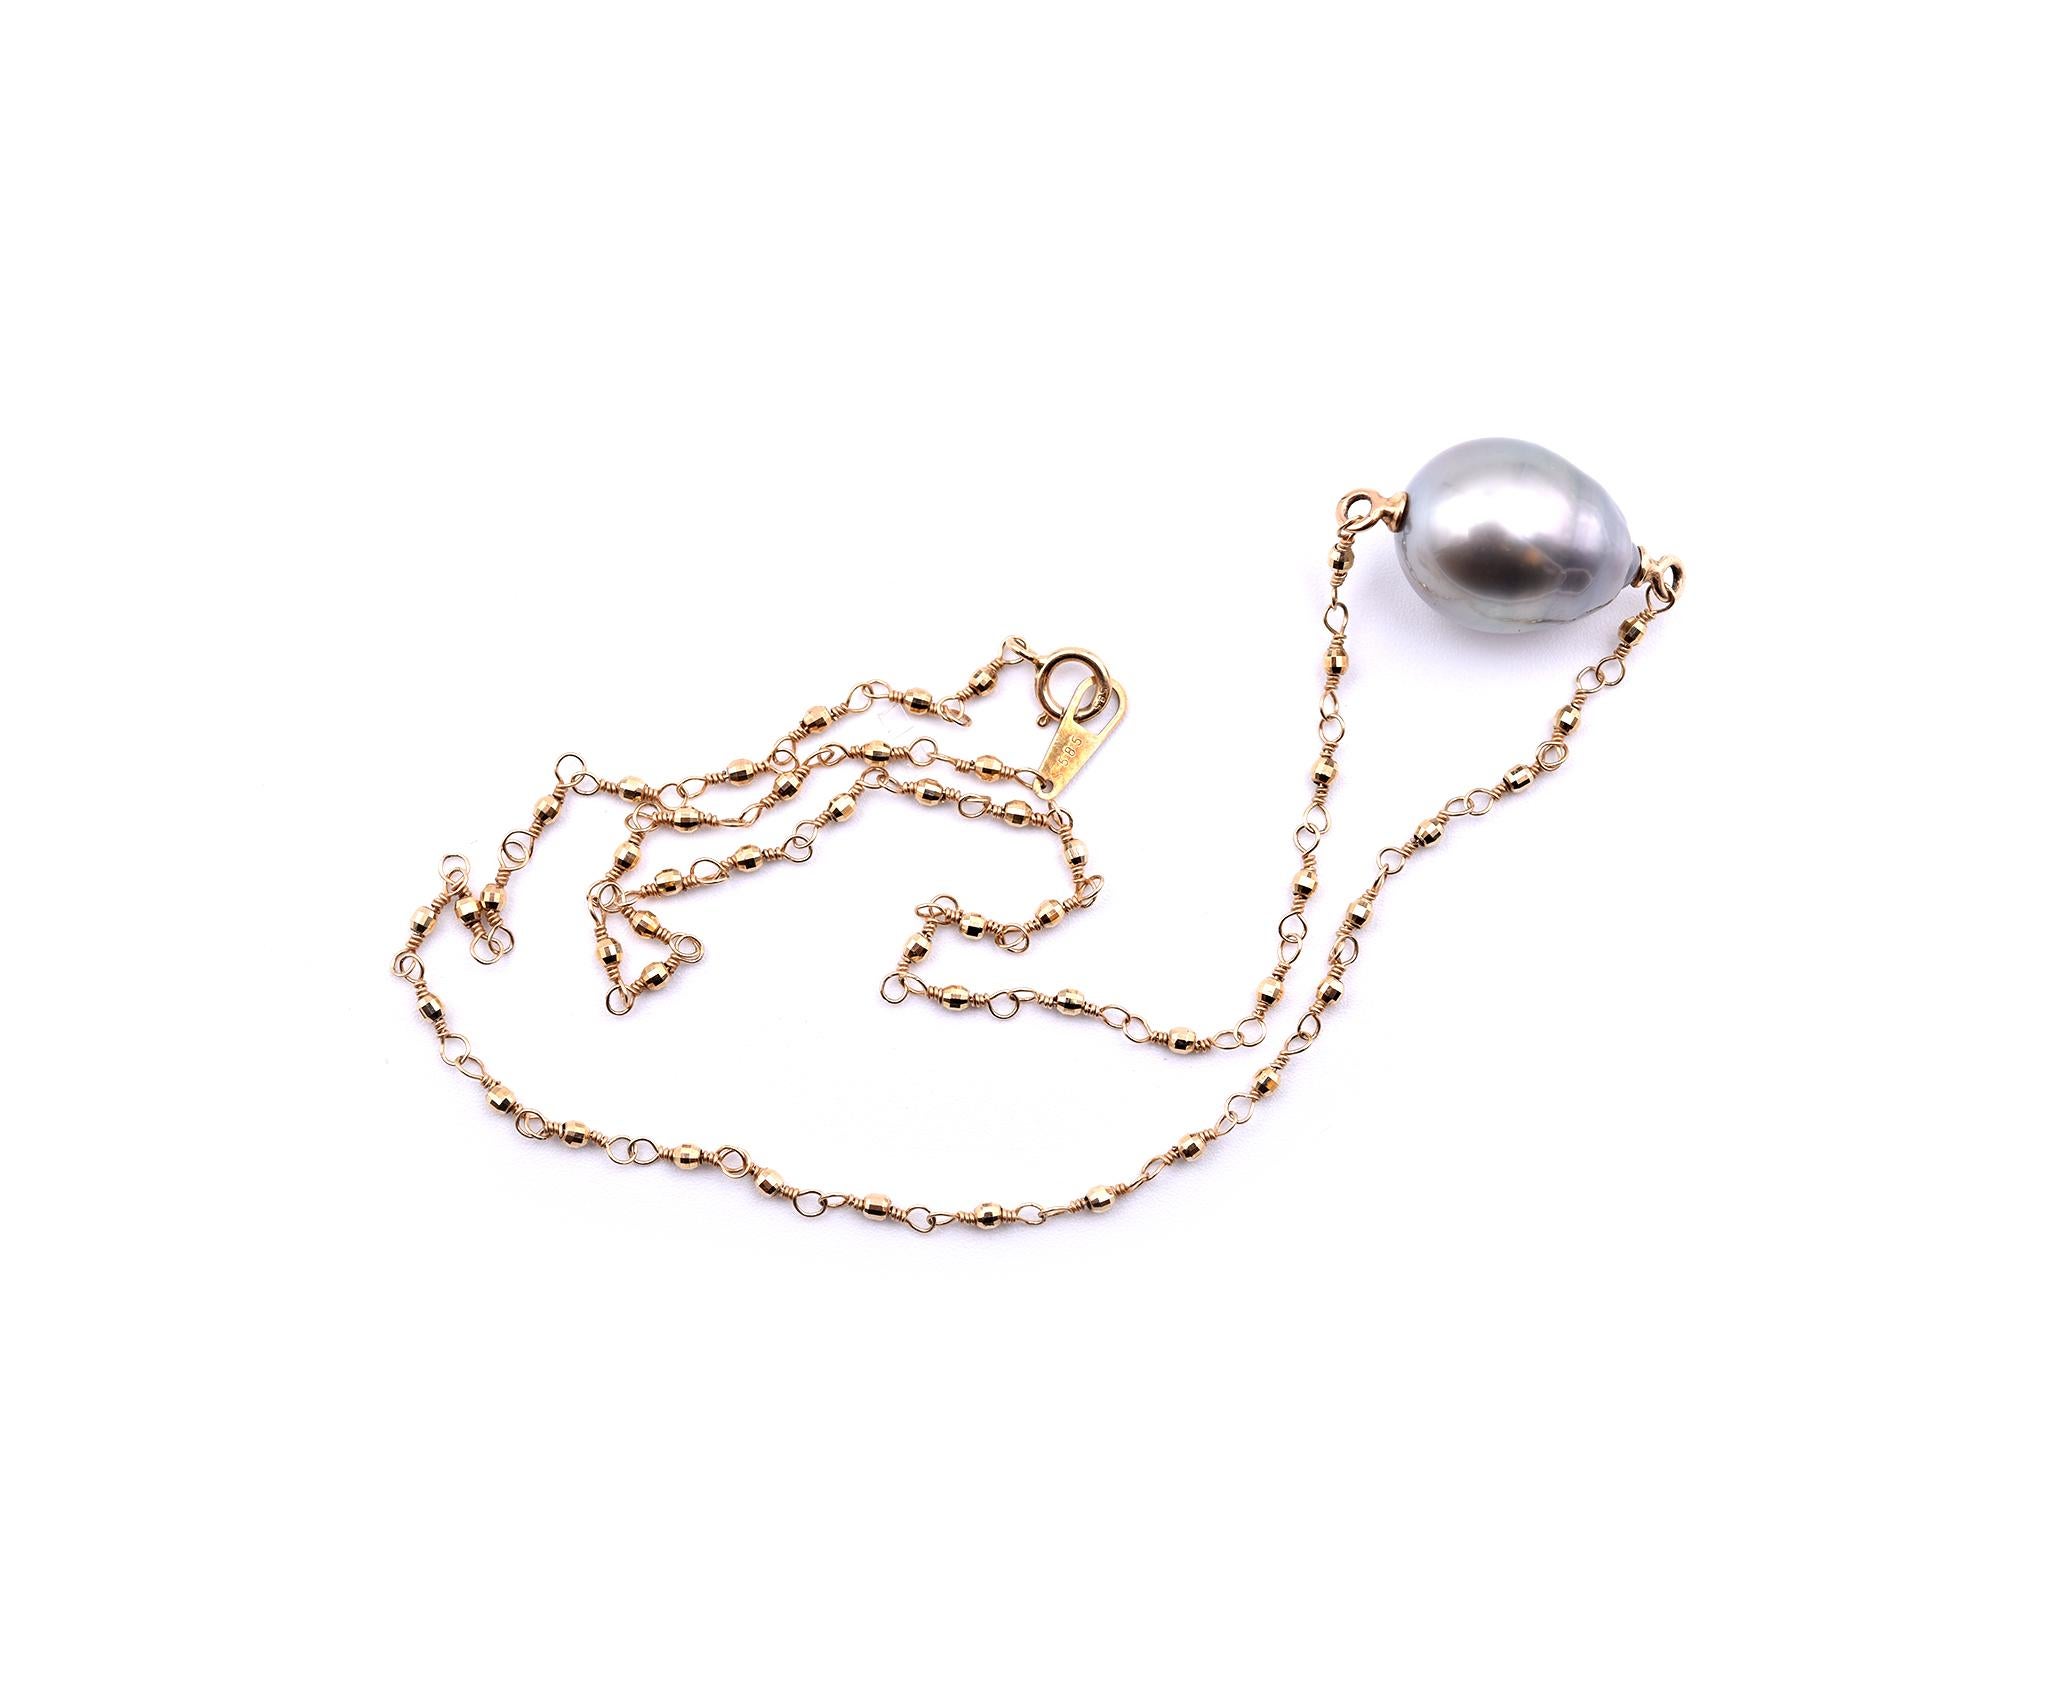 Designer: Mizuki
Material: 14k yellow gold 
Tahitian Pearl: 1 baroque Tahitian pearl 12.20mm by 15.45mm
Dimensions: Necklace is 14 inches long 
Weight: 5.34 grams
